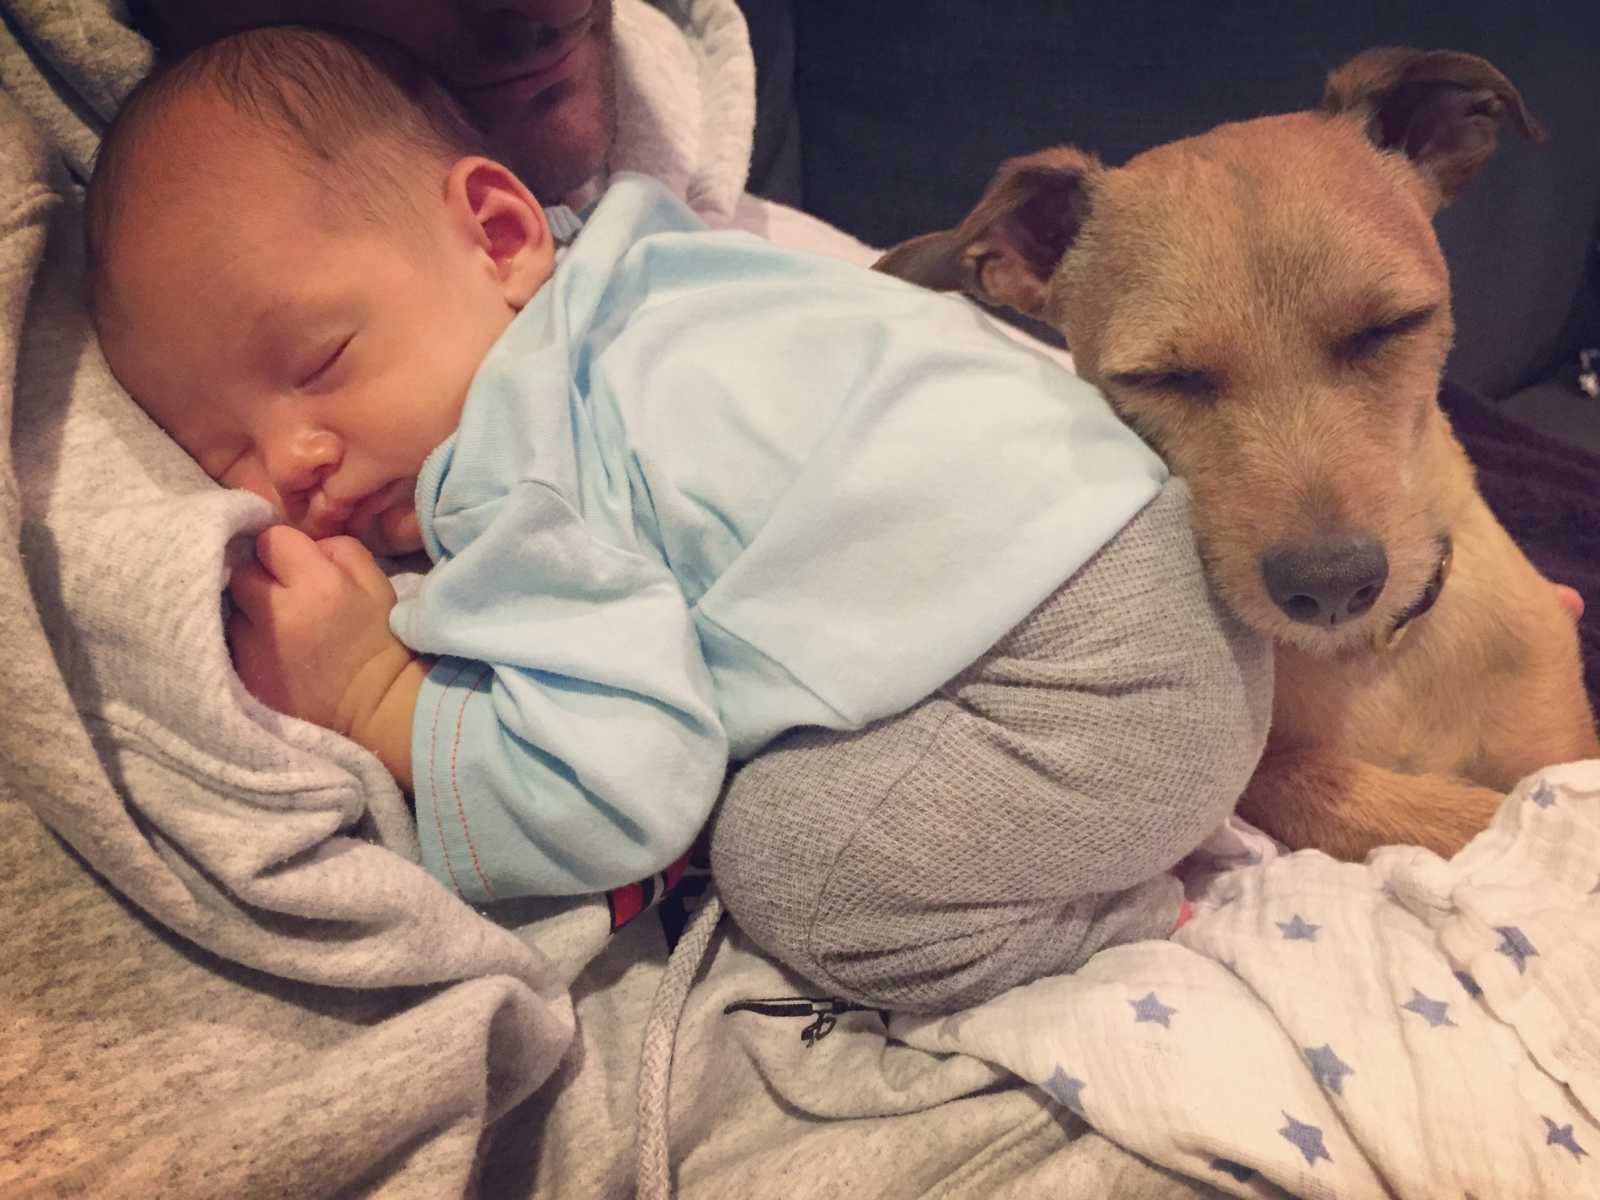 dog resting head on baby's back while baby is sleeping on mans chest